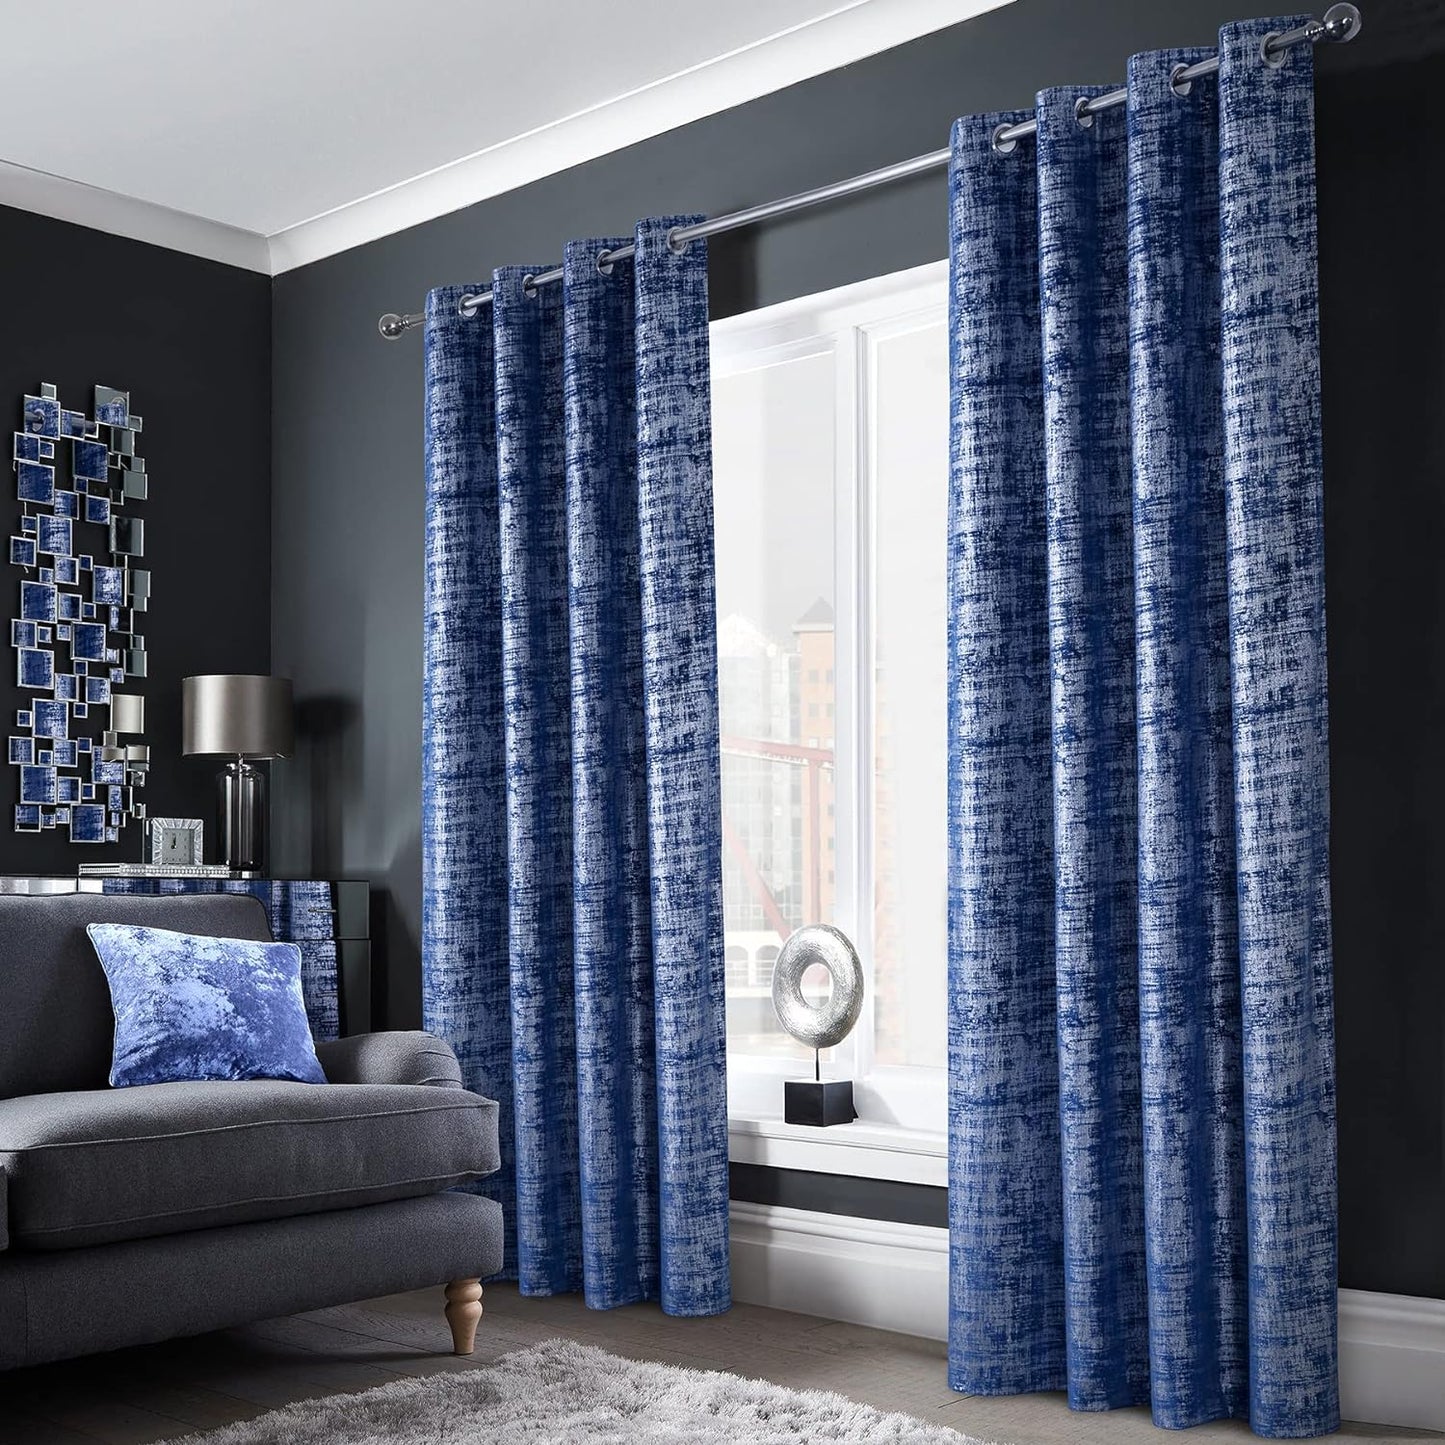 Always4U Soft Velvet Curtains 95 Inch Length Luxury Bedroom Curtains Gold Foil Print Window Curtains for Living Room 1 Panel White  always4u Navy Blue (Silver Print) 2 Panels: 52''W*108''L 